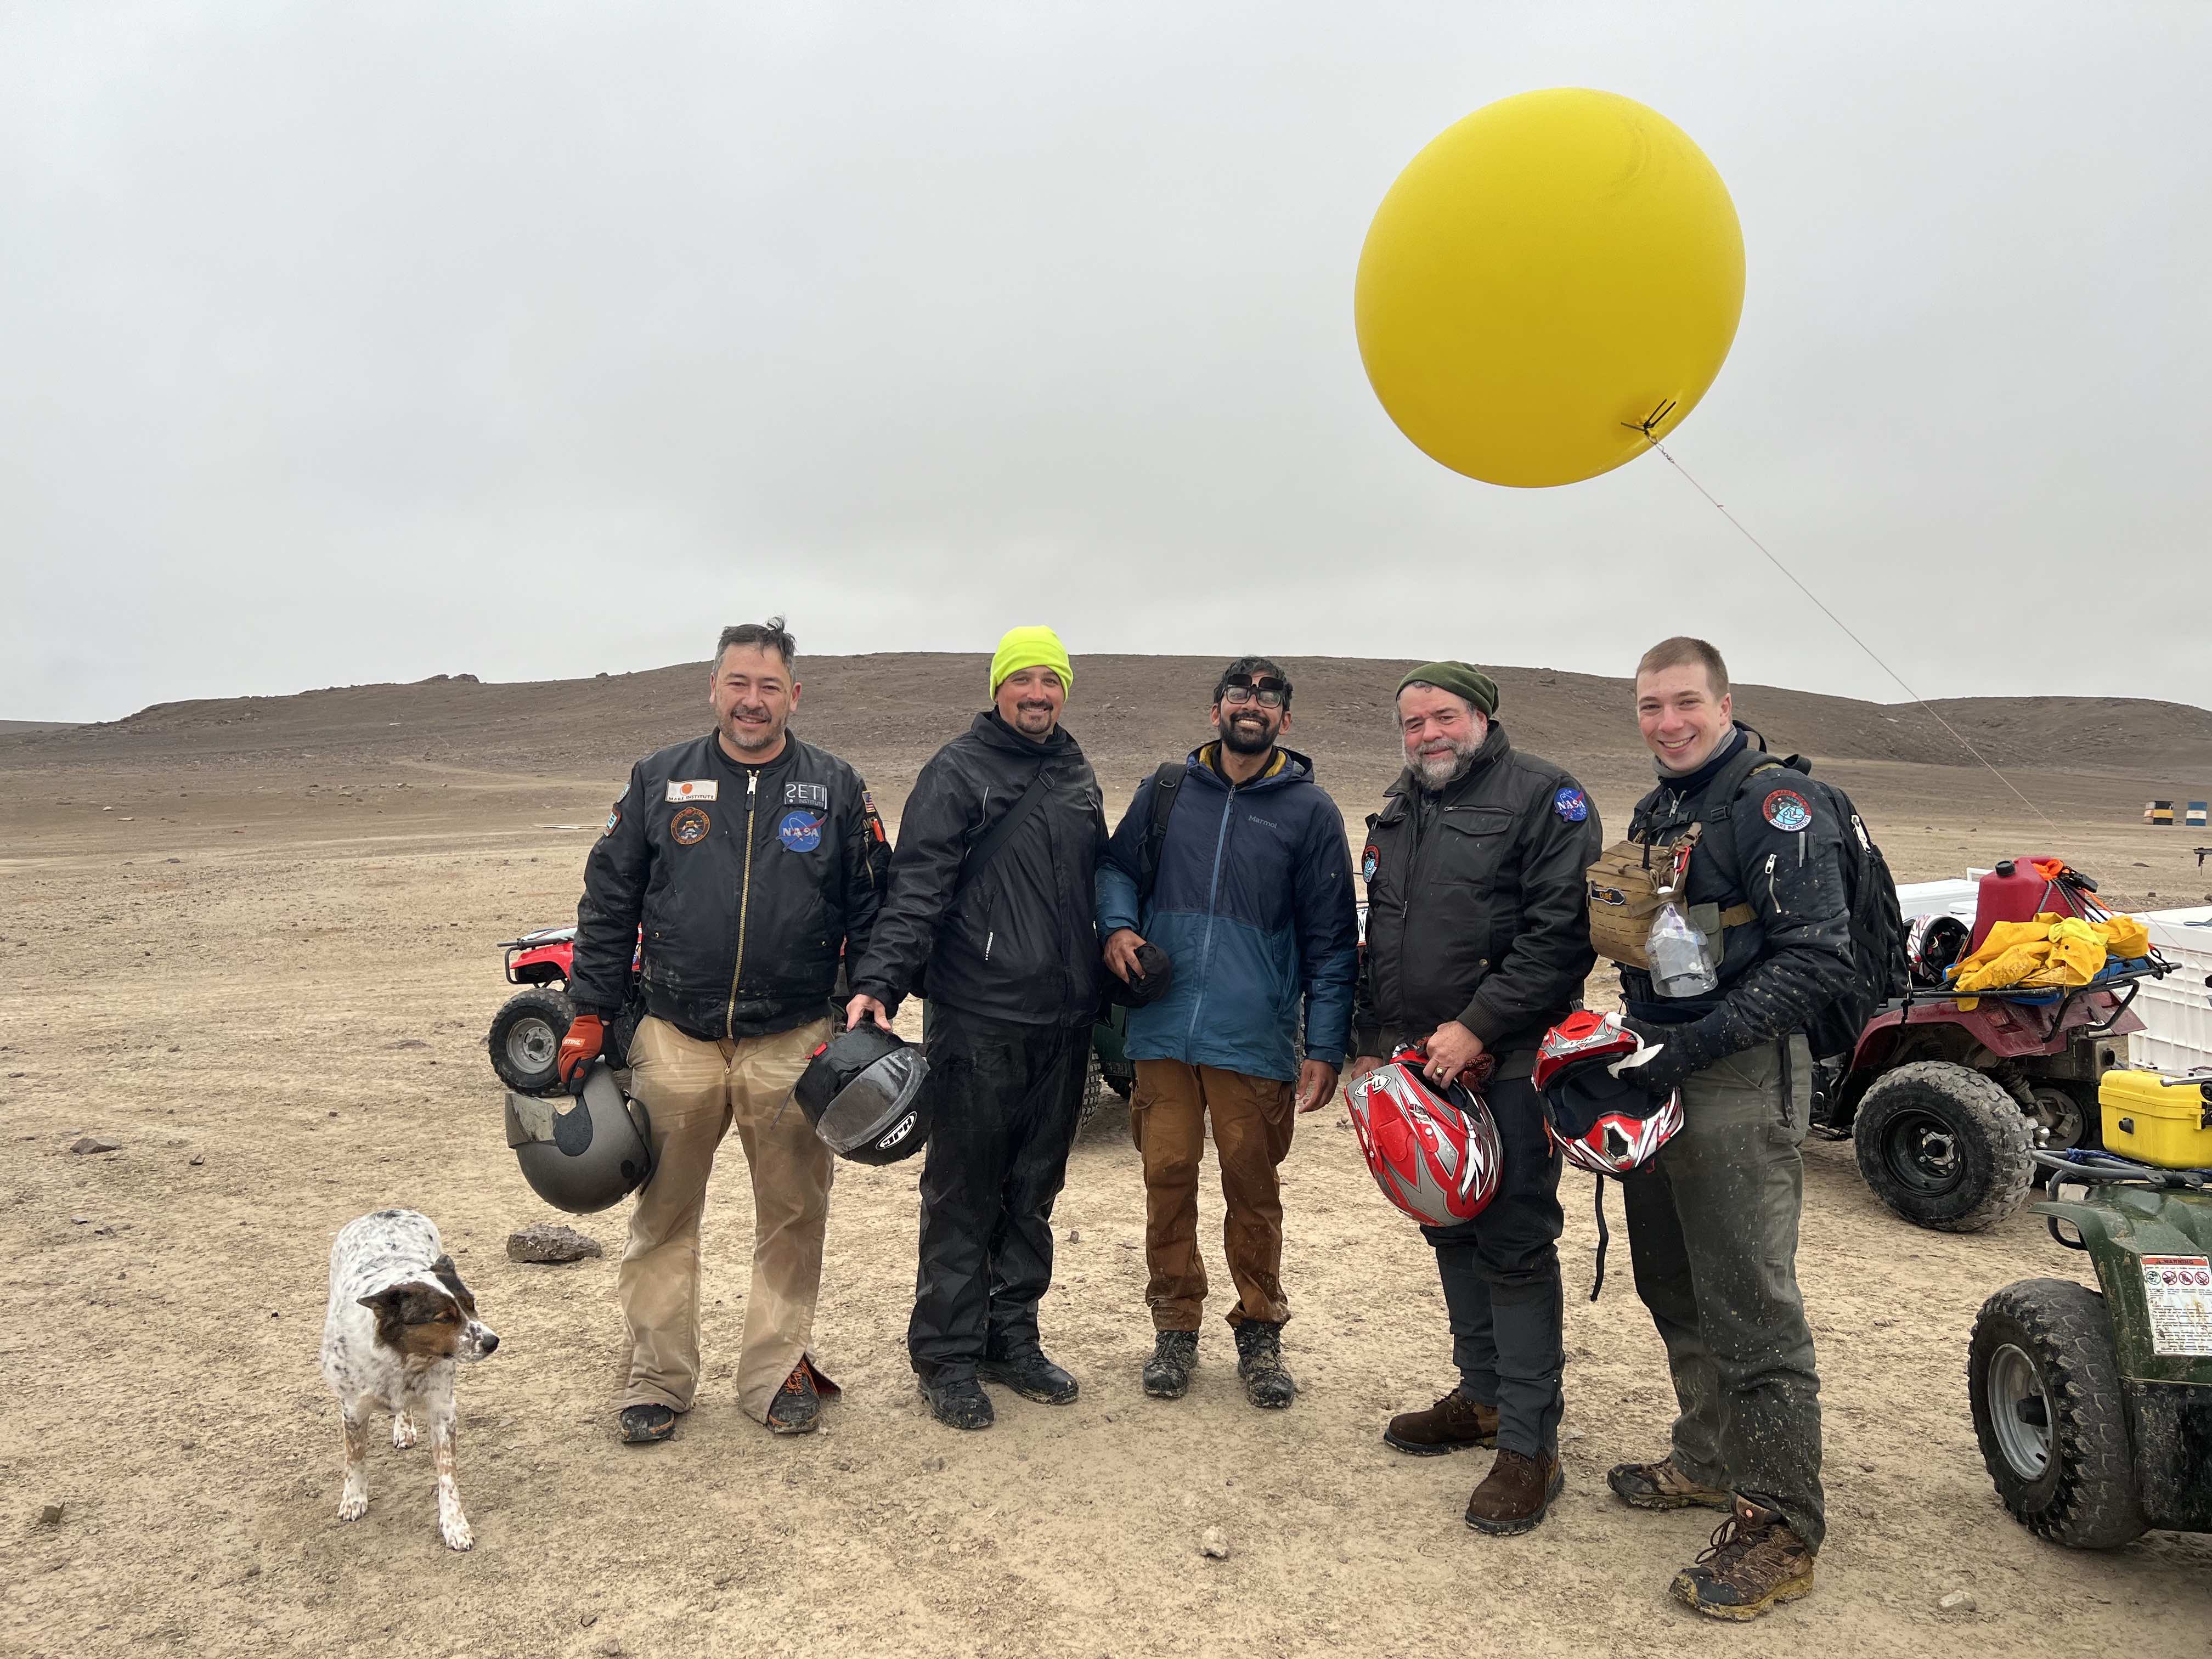 The Haughton-Mars Project team stand under a yellow weather balloon.